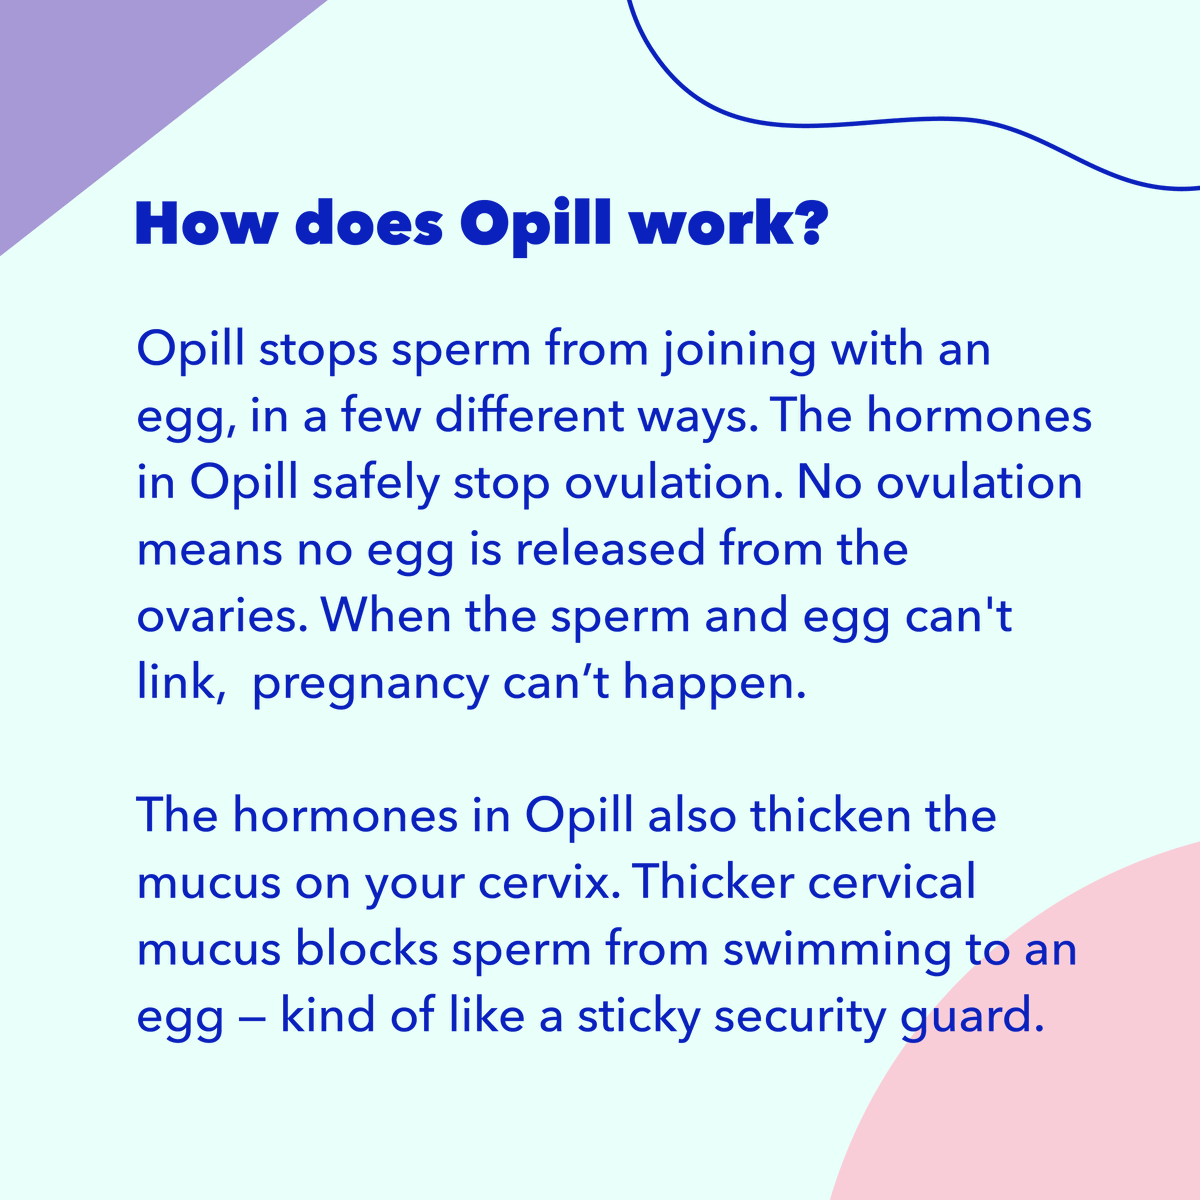 🎉 Great news: Opill, an over-the-counter birth control, is now available at @ppnorthcentral health centers! Just like getting emergency contraception or condoms, you can visit a Planned Parenthood & pick up birth control without an appointment or prescription at the front desk!